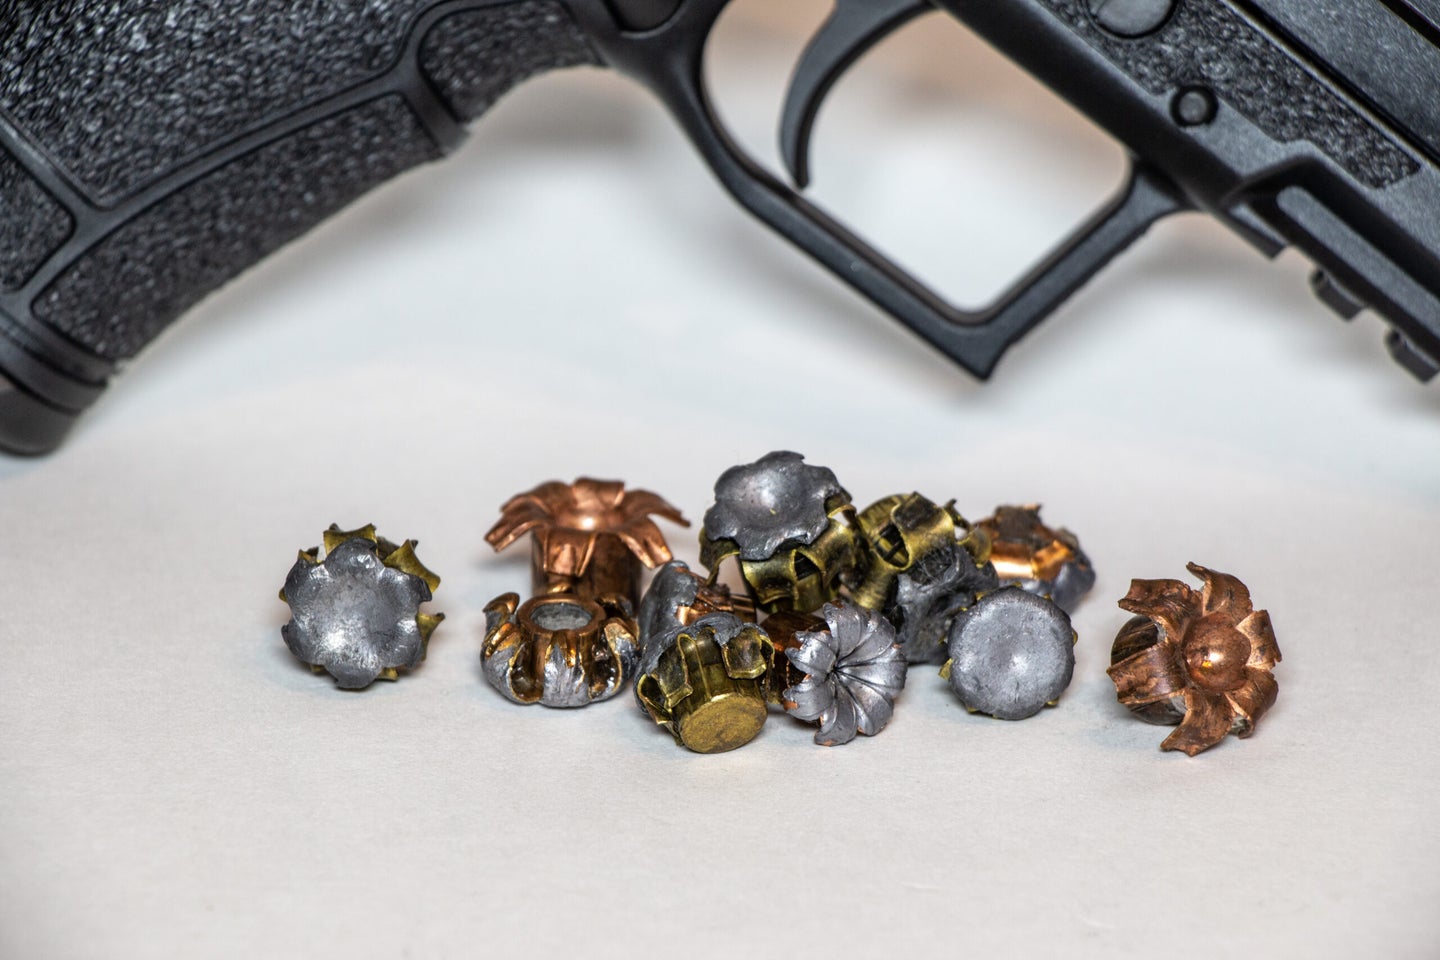 How to Choose the Best Bullet Weight for Your Defensive Handgun